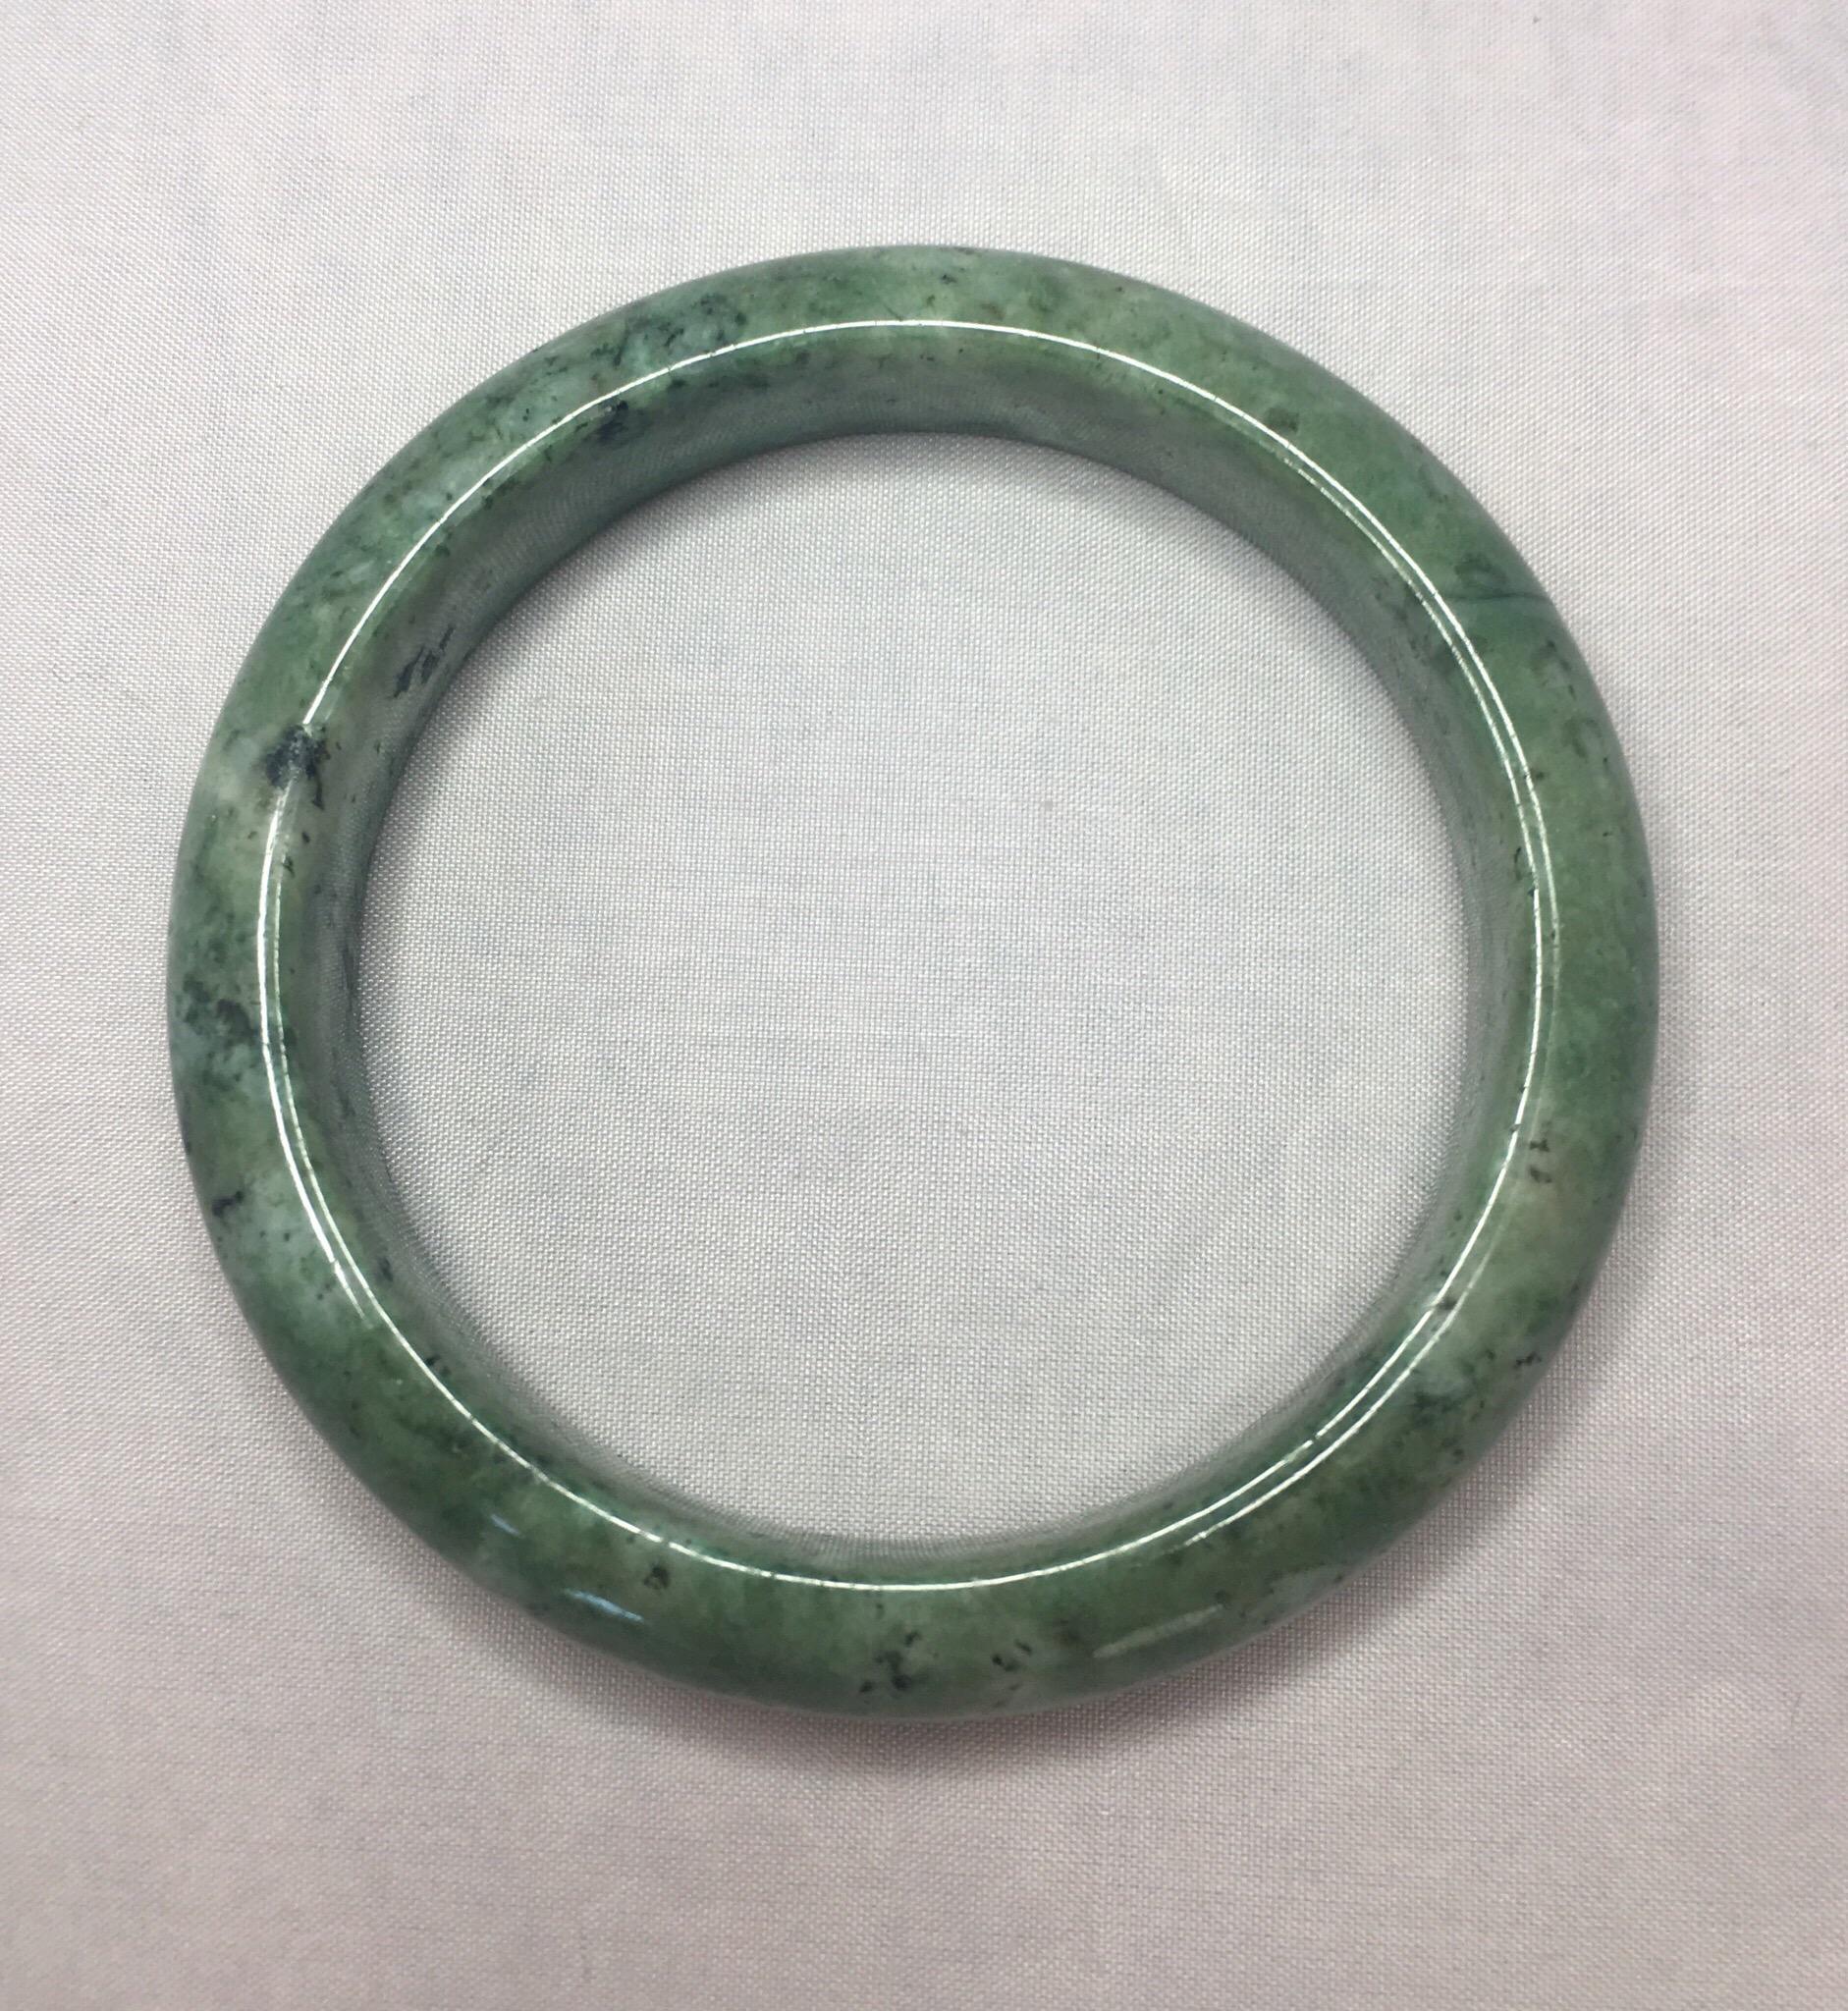 Beautiful natural light green jadeite jade bangle.

Has a beautiful mottled light green colour with an excellent polish and lustre with no cracks or chips.

This is a treated jadeite bracelet, as to be expected of such a large piece in this price